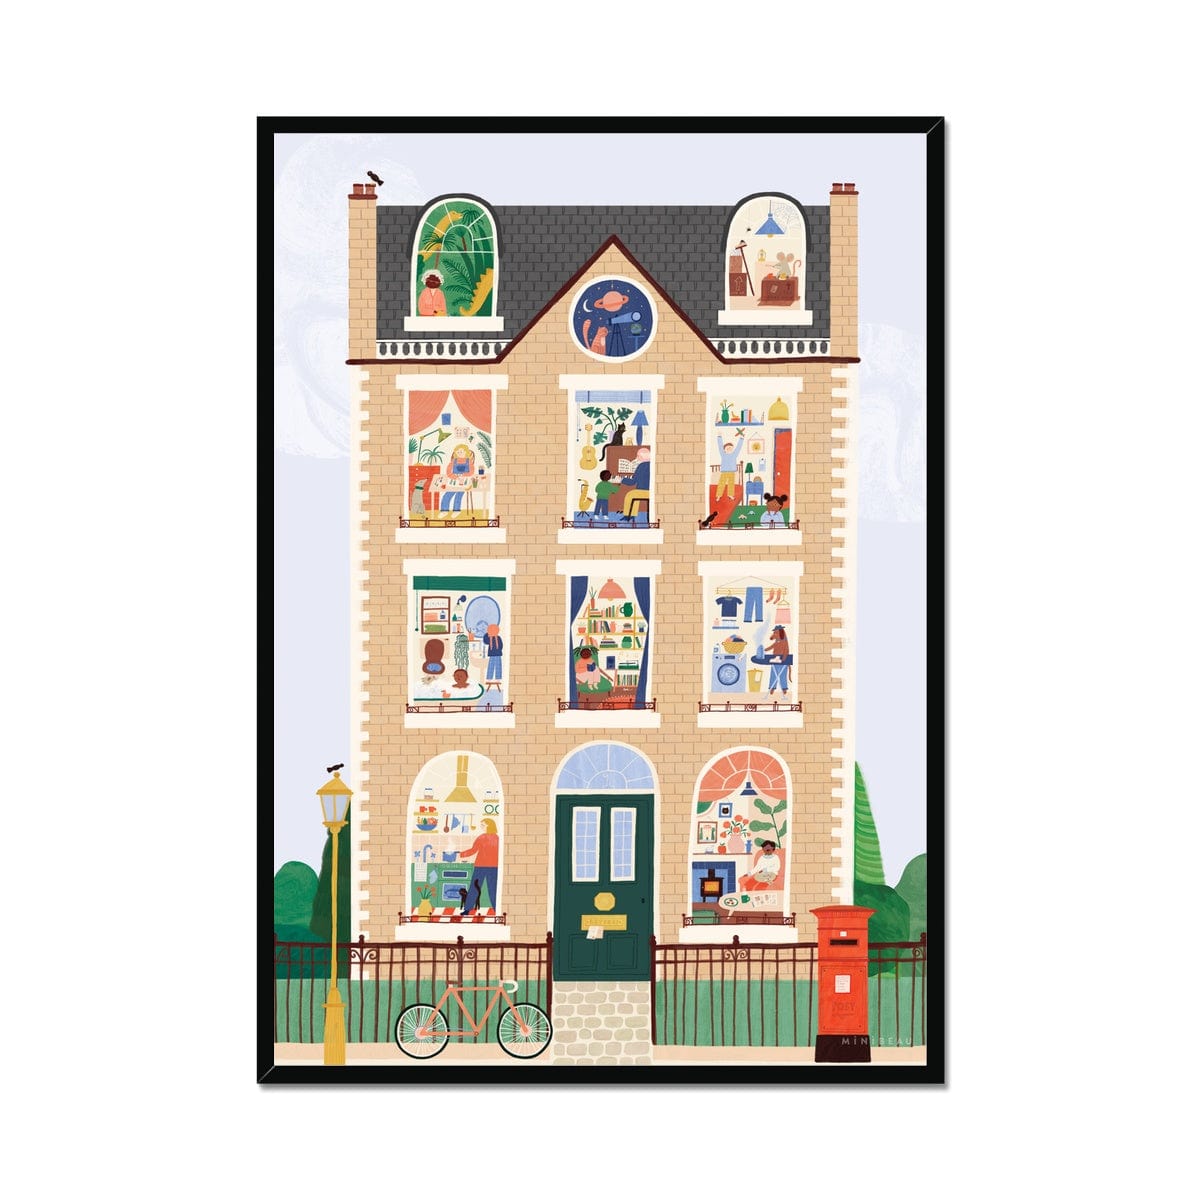 Art print in black frame. Our House Art Print shows a large brick town house with 11 windows each showing a different scene, from an ironing dog to a dinosaur in the attic to the artist herself hard at work. Features a bike against a railing, a post box, traditional lamppost and hidden birds.